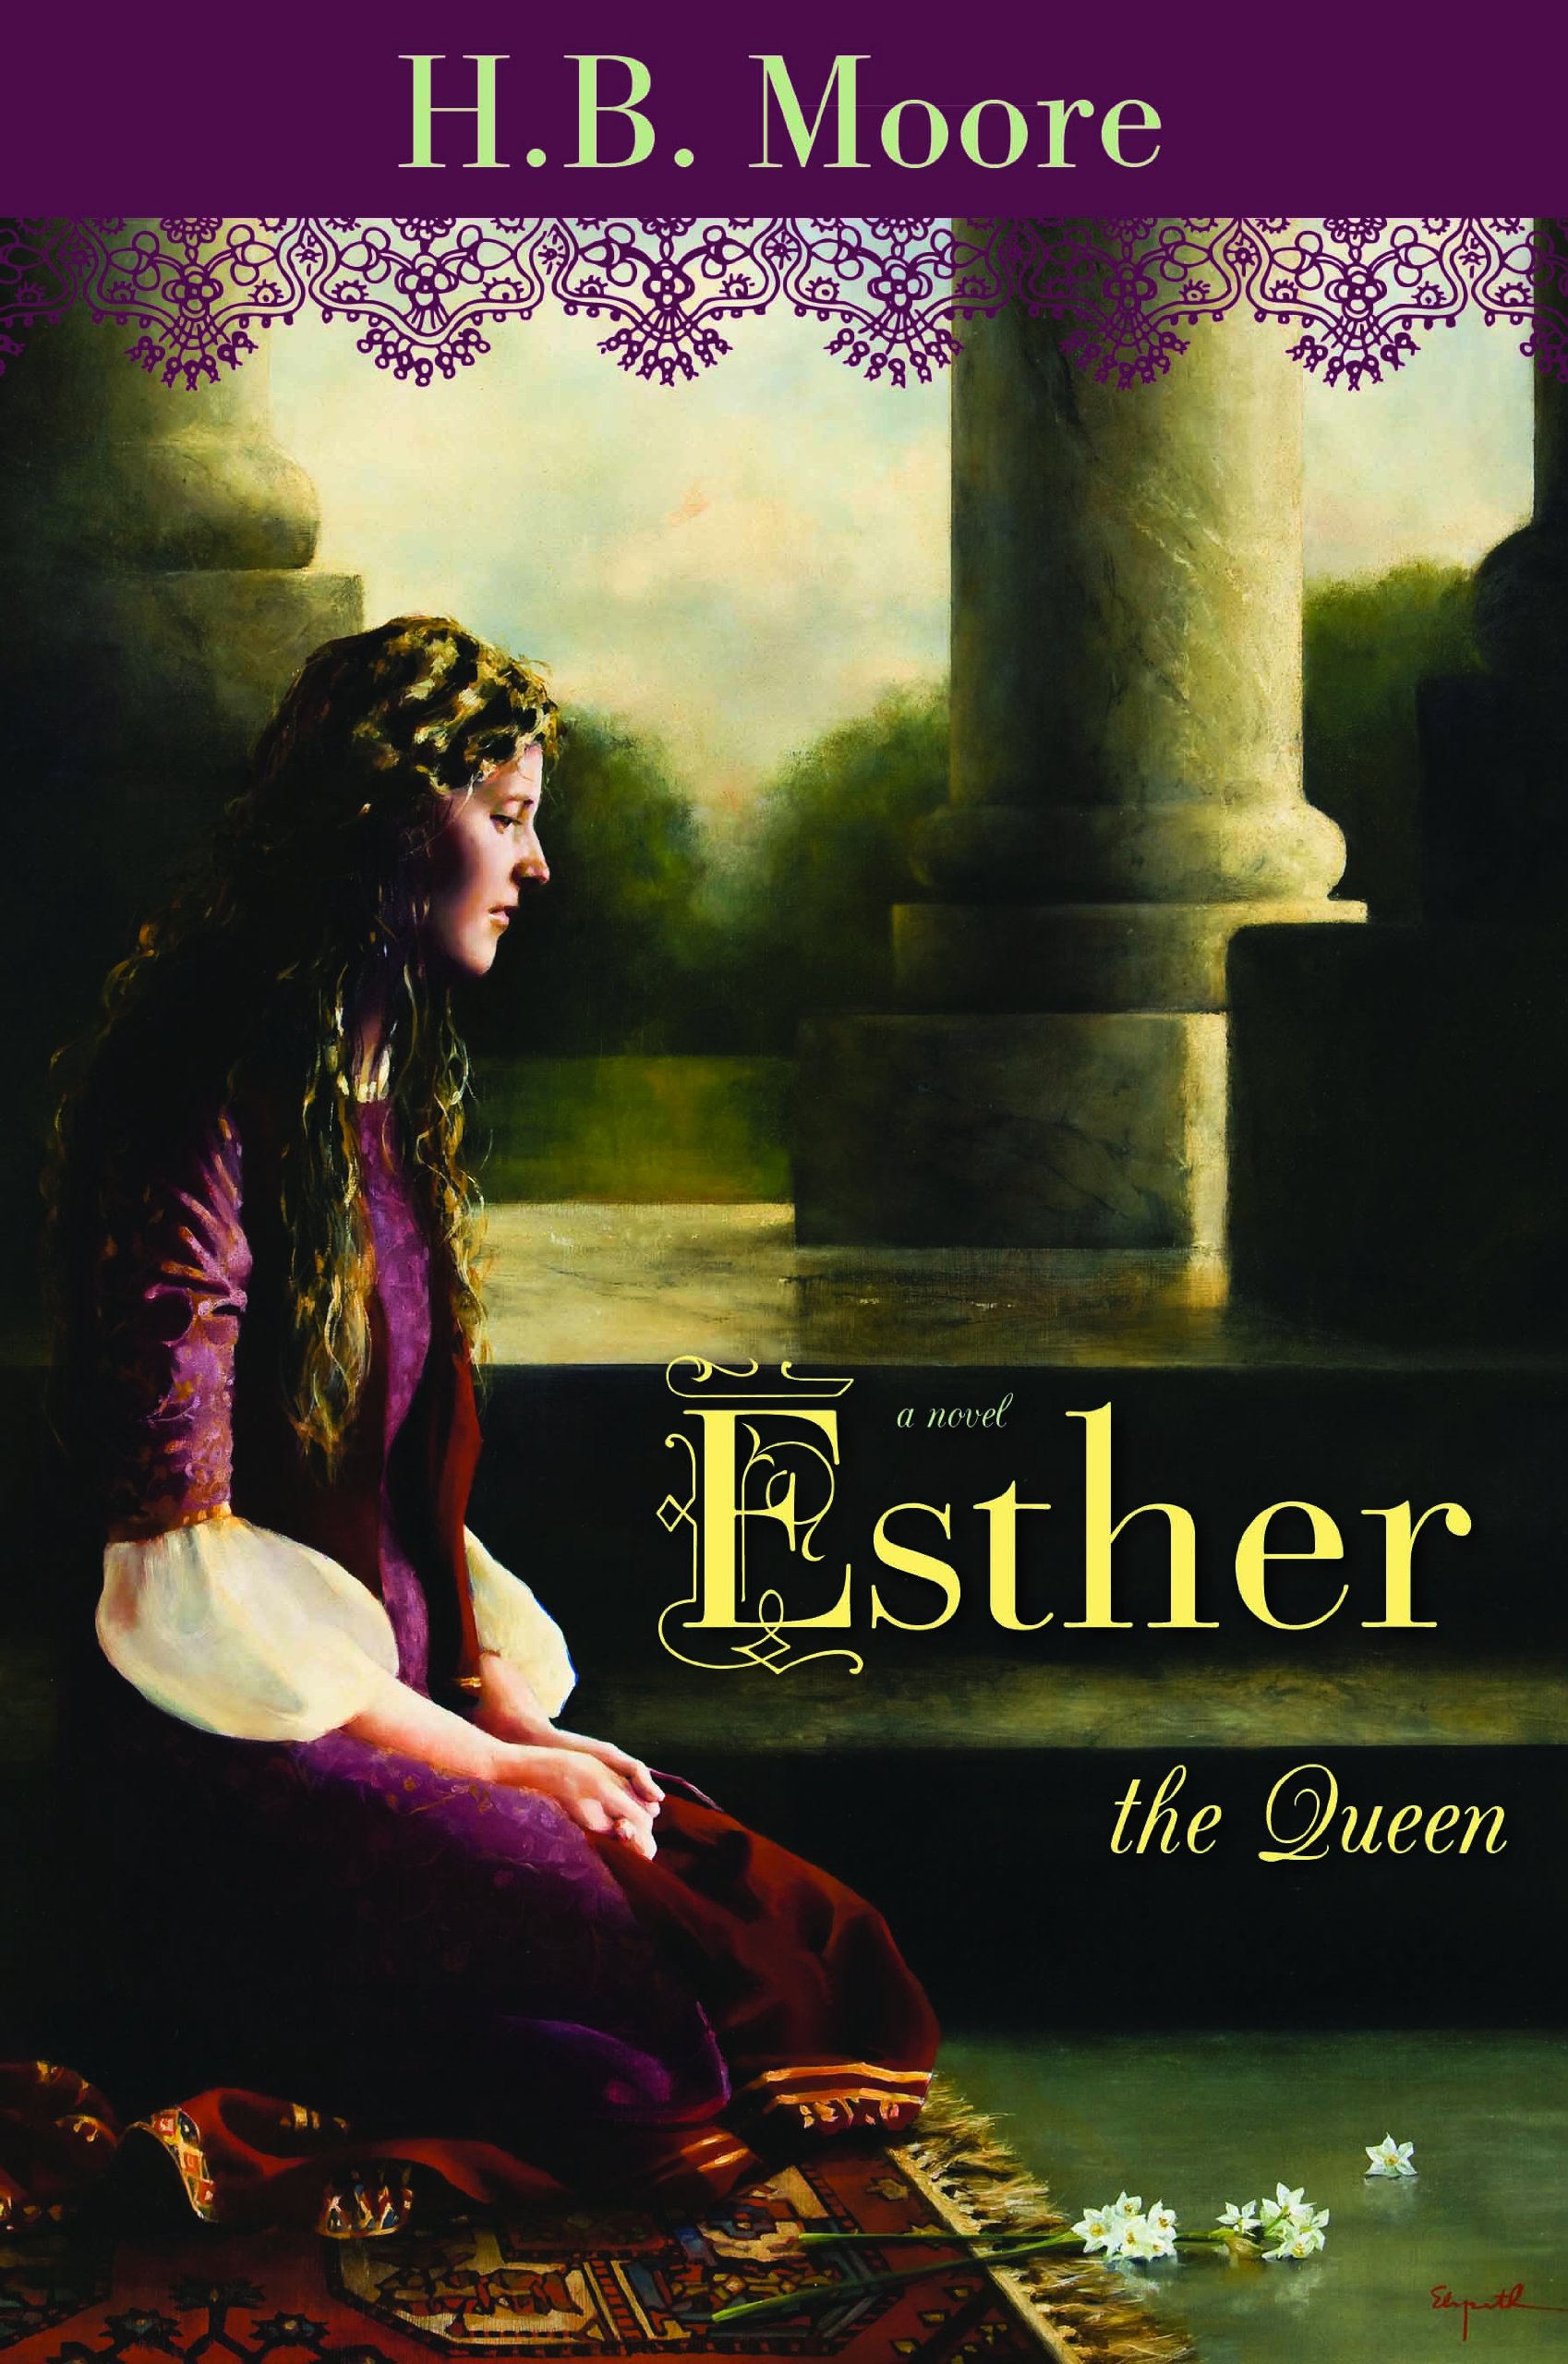 Esther the Queen